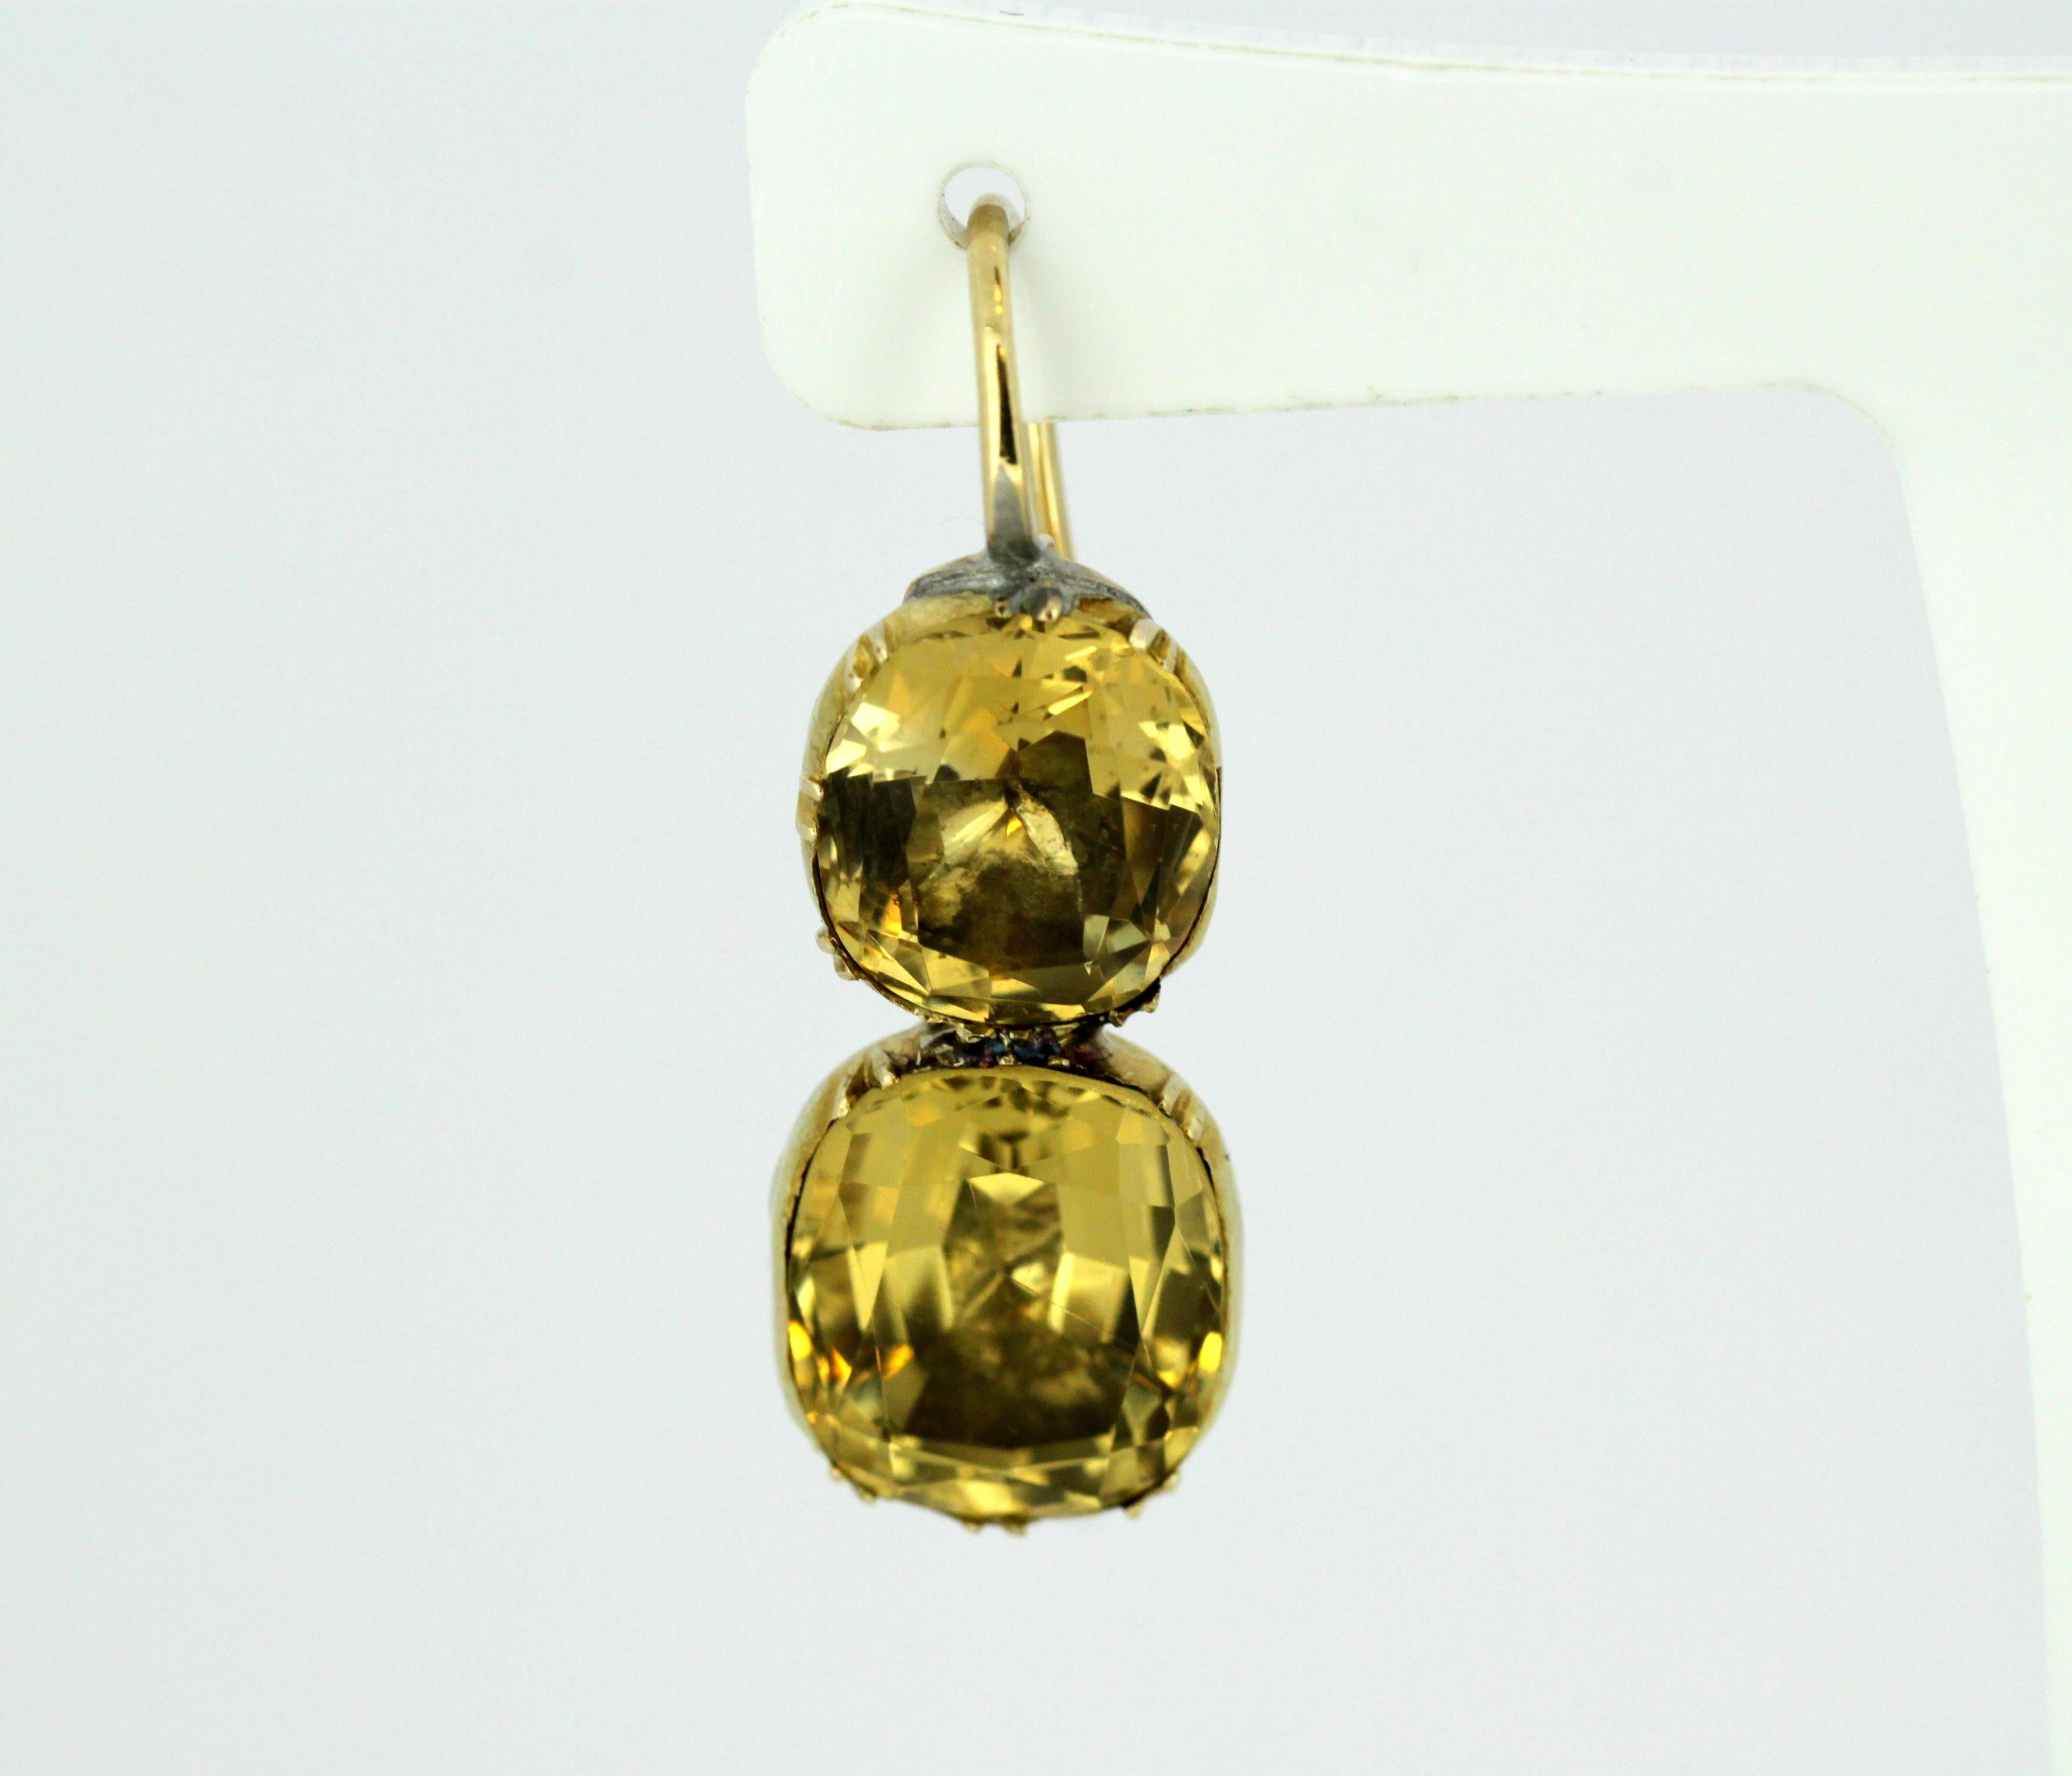 Antique Victorian 15kt gold earrings with natural citrine.
Made in England Circa 1850's
Tested positive for 15kt gold.

Approx Dimensions - 
Size : 3.4 x 1.3 x 1.7 cm
Weight : 10 grams

Citrine - 
Cut : Cushion
Quantity : 4
Sizes : 5 ct & 3